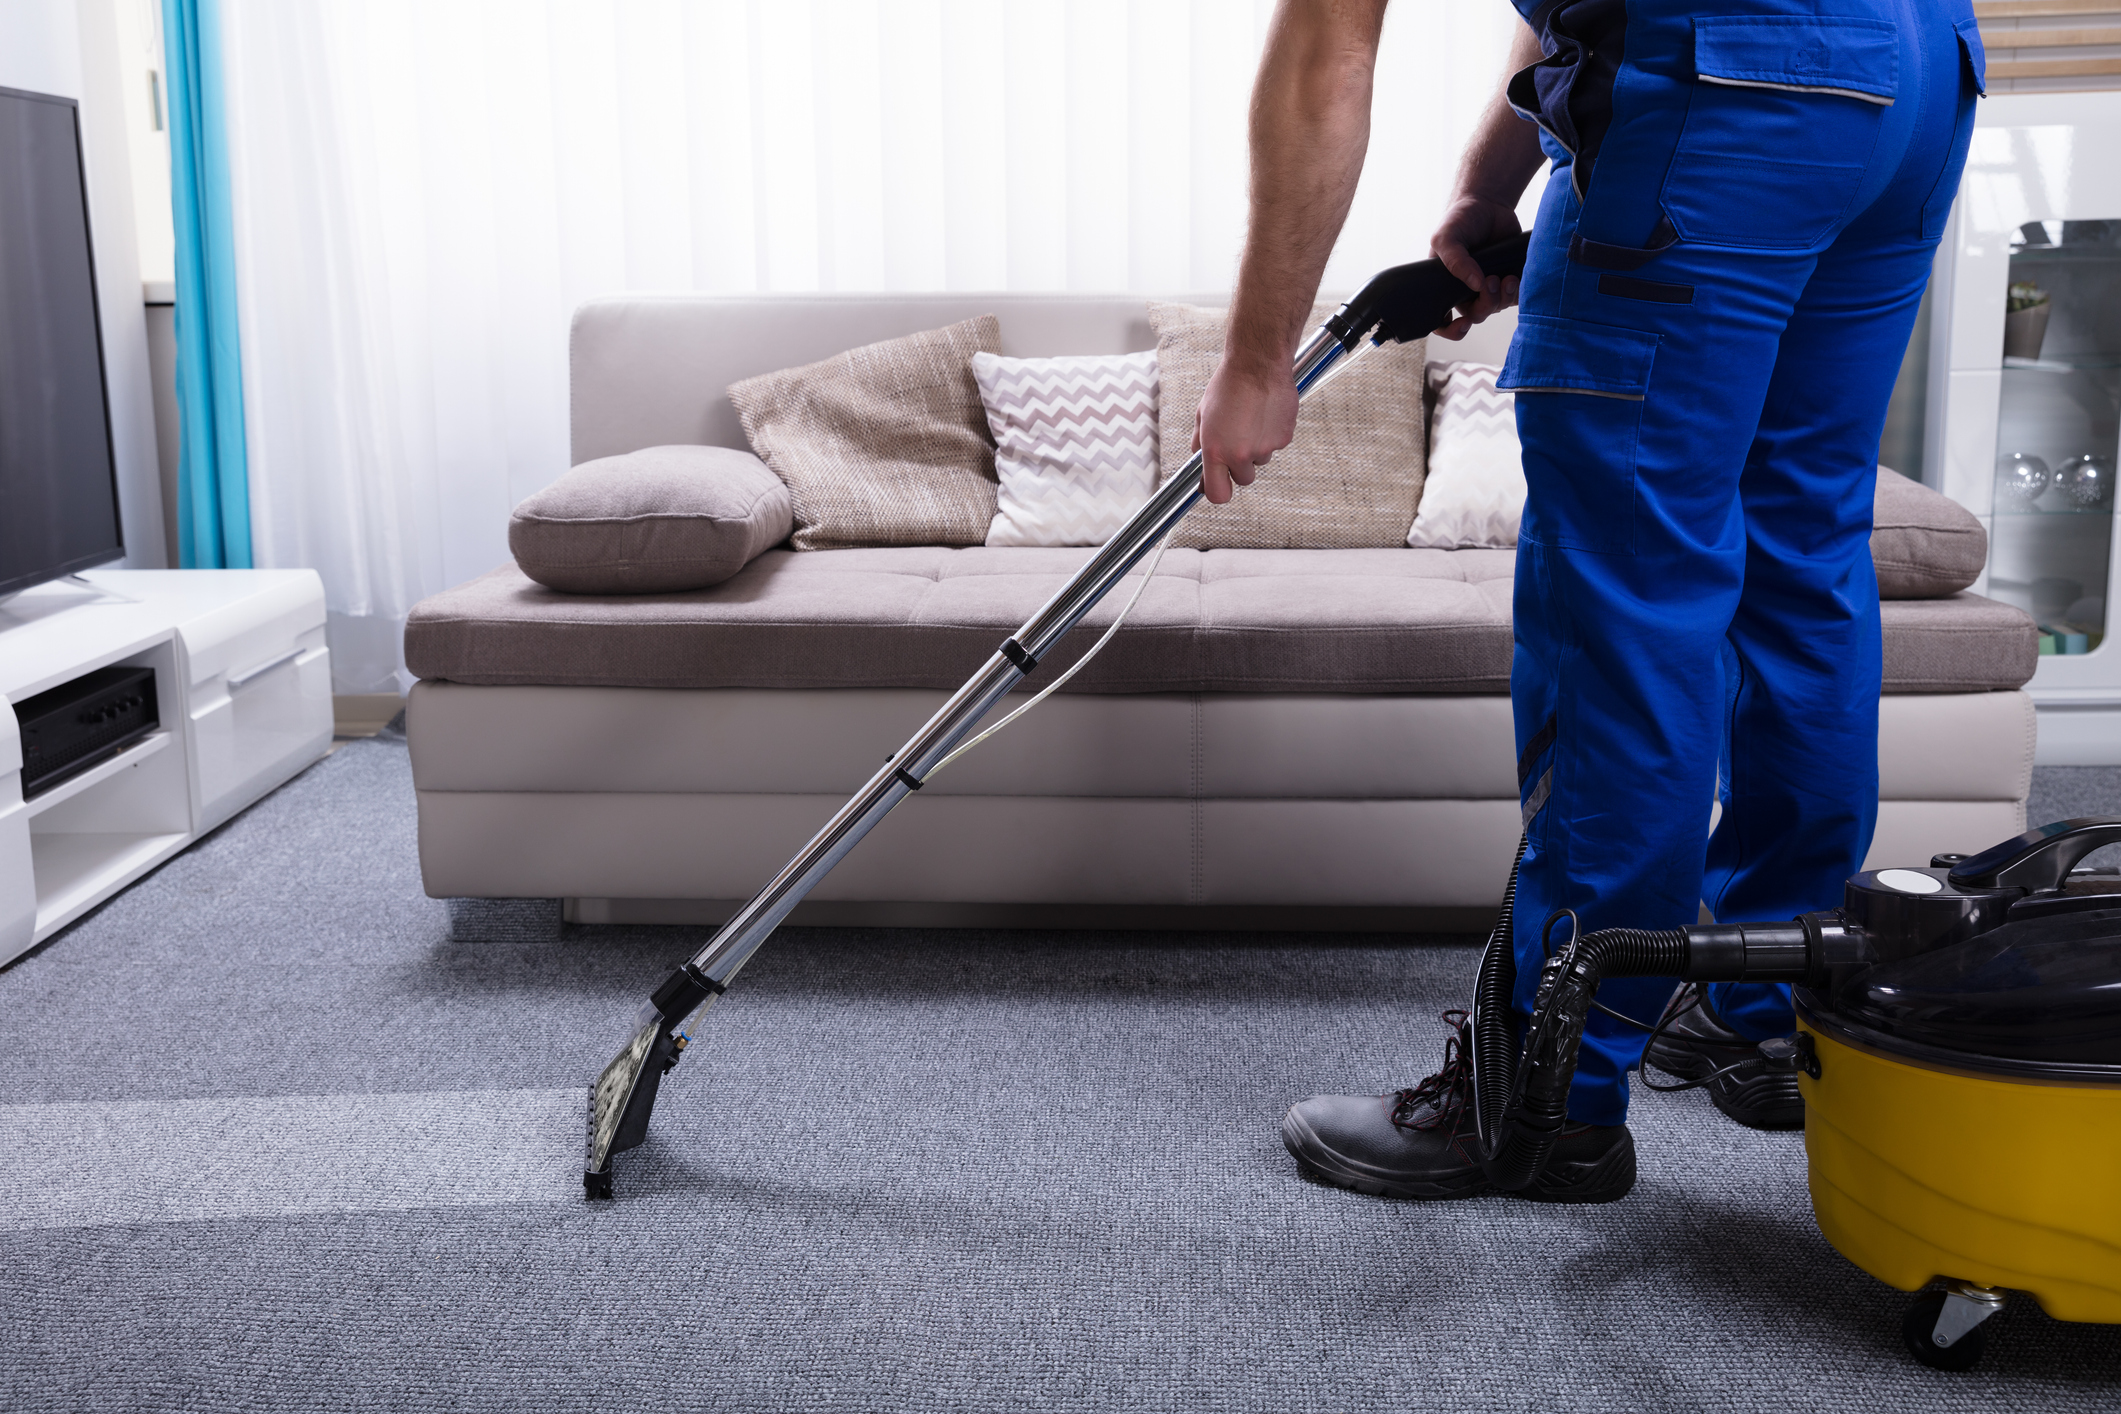 Professional Carpet Cleaning in Monterey, CA - Refresh Your Carpets Today!